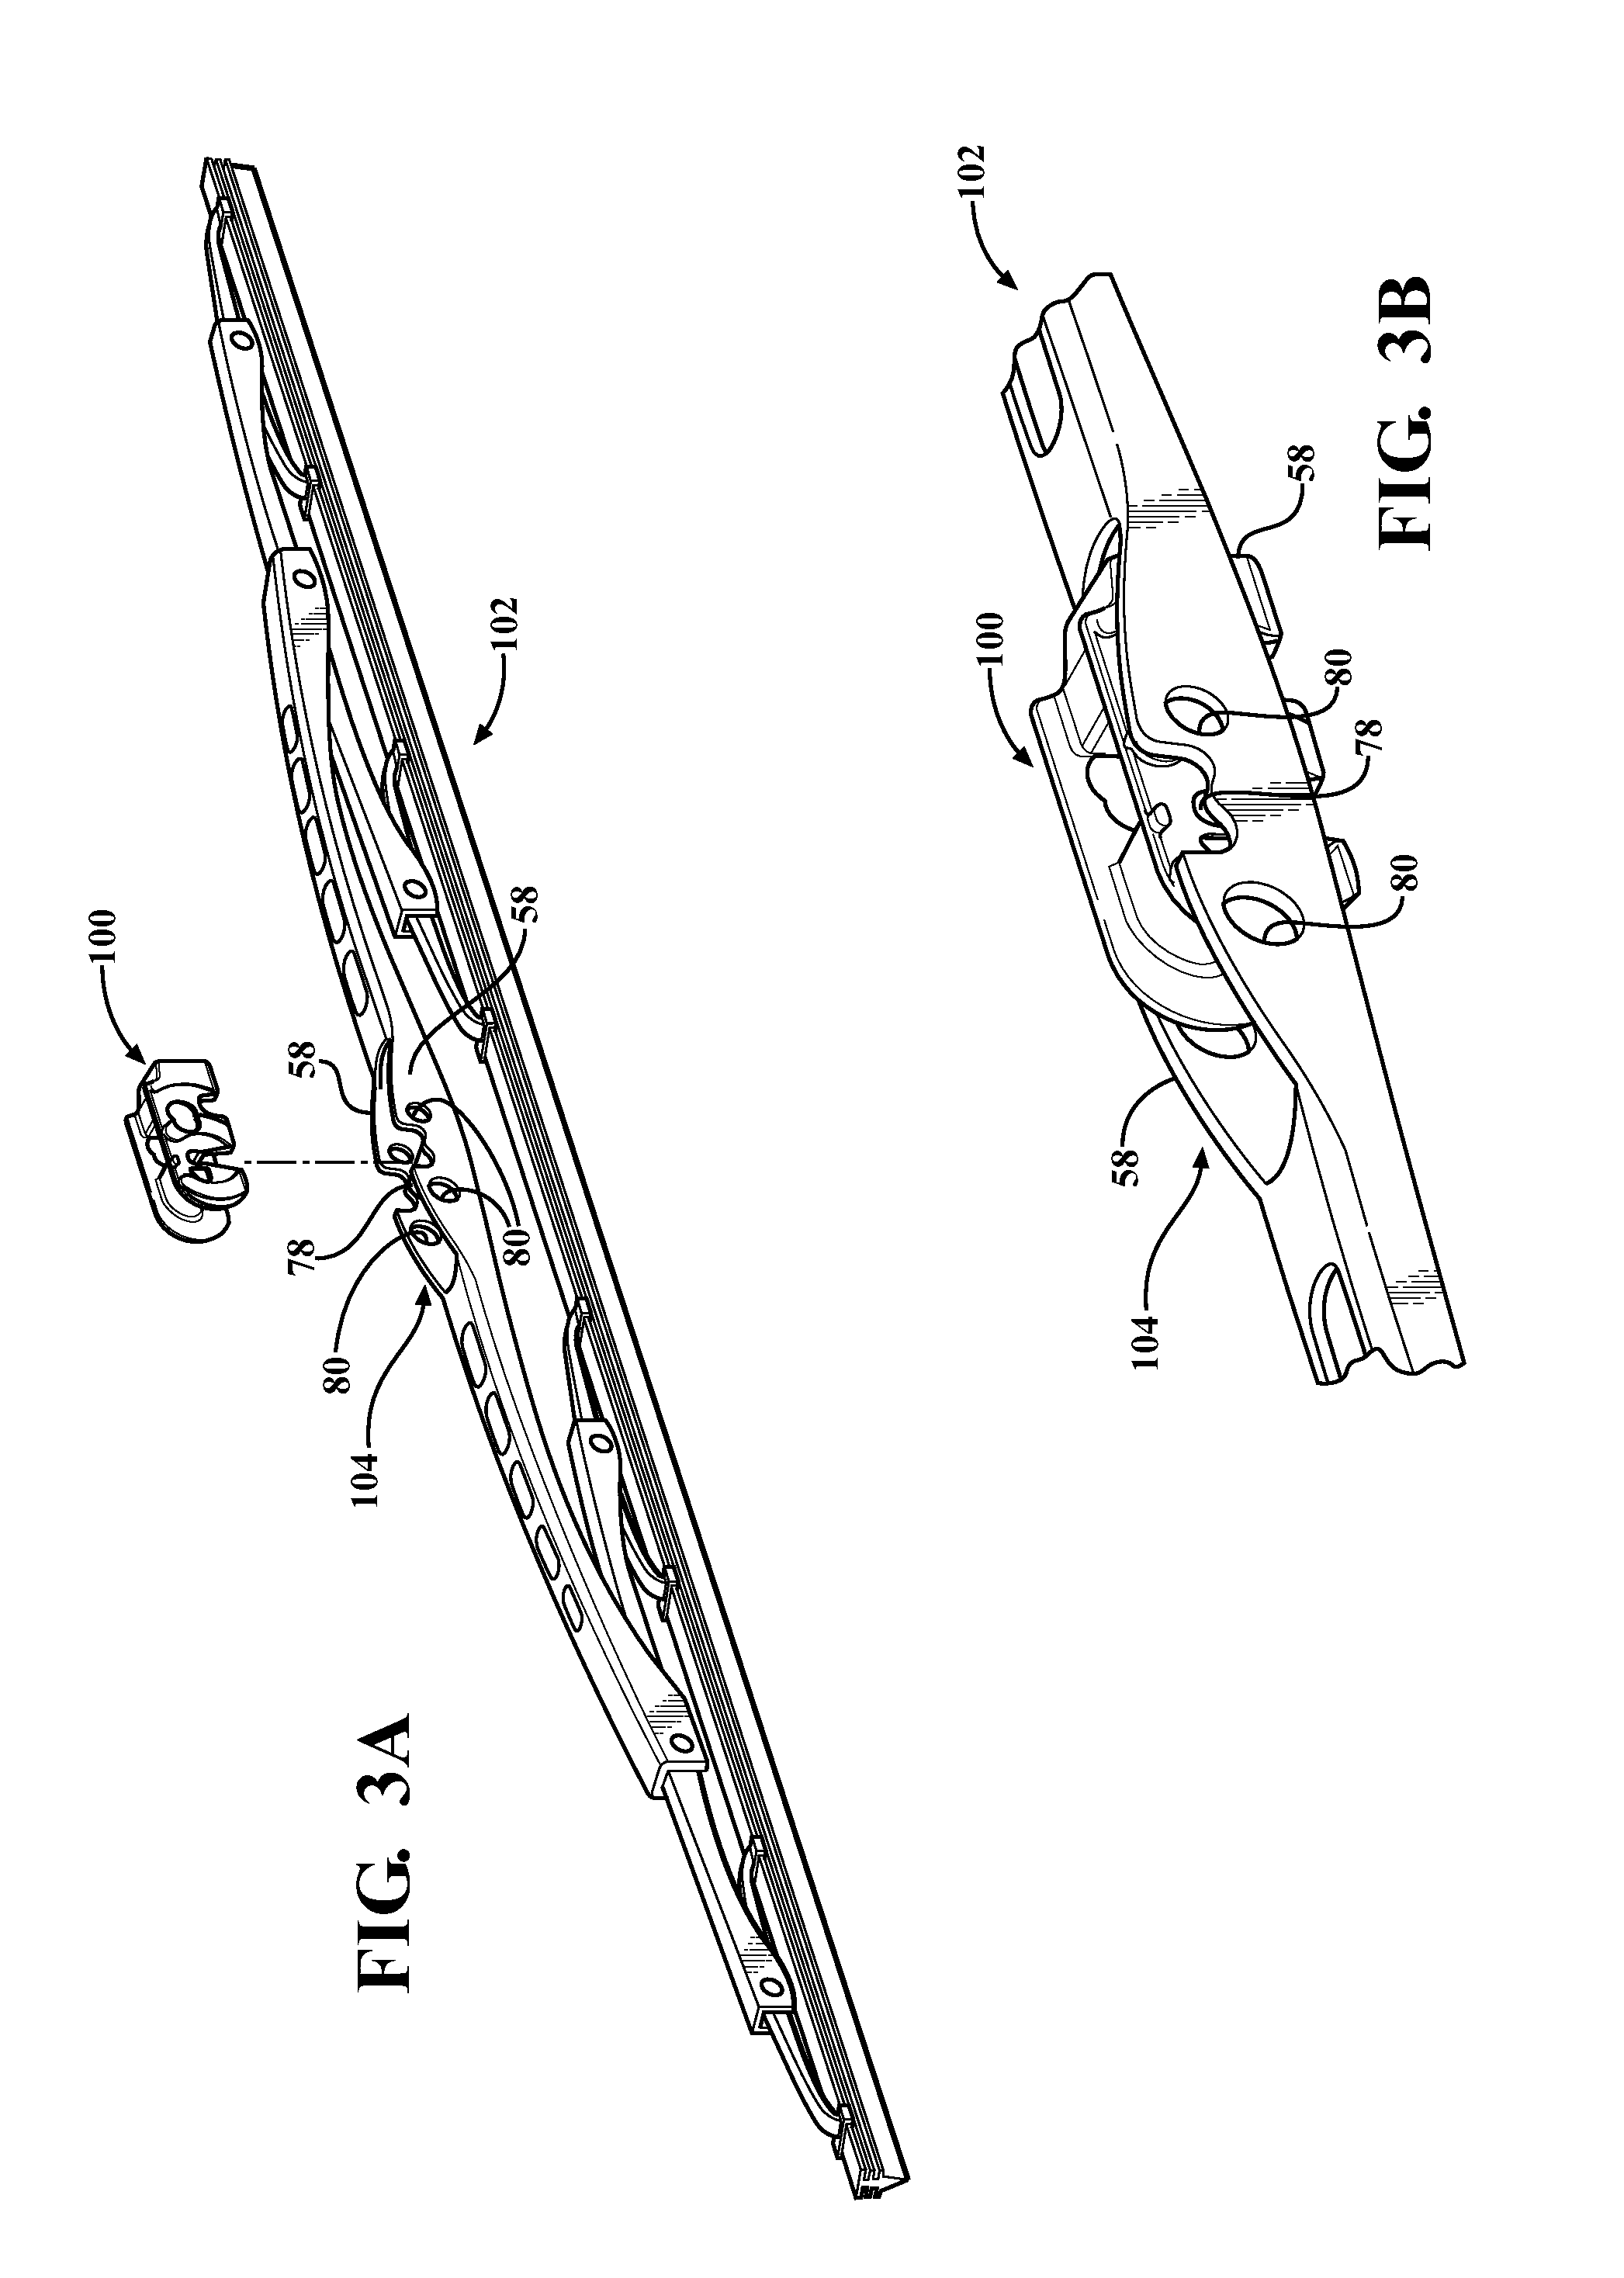 Multifunction wiper blade connector and assembly